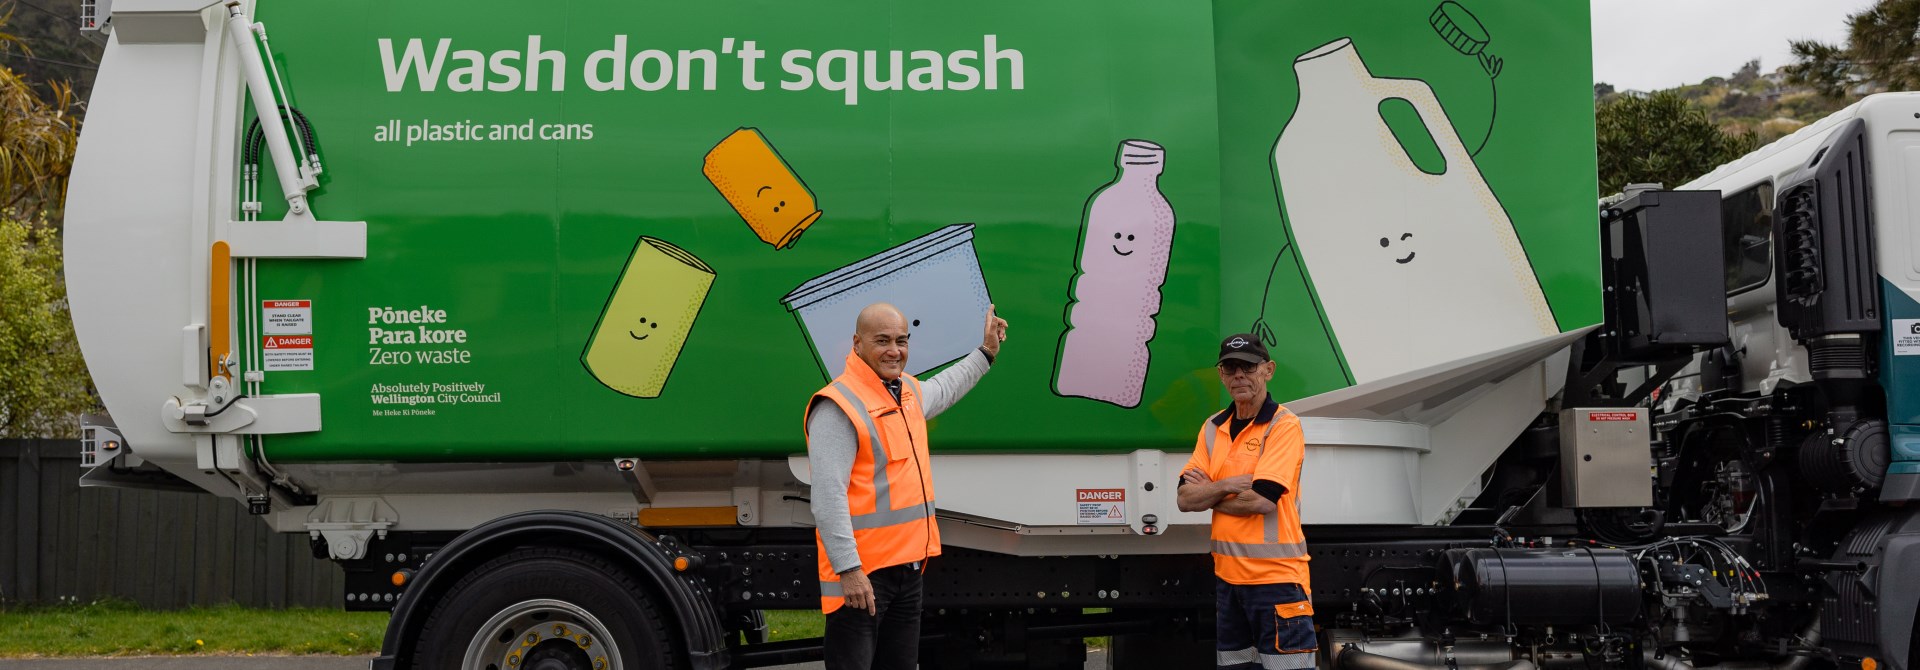 Two people wearing high vis jackets standing infront of a recycling truck.